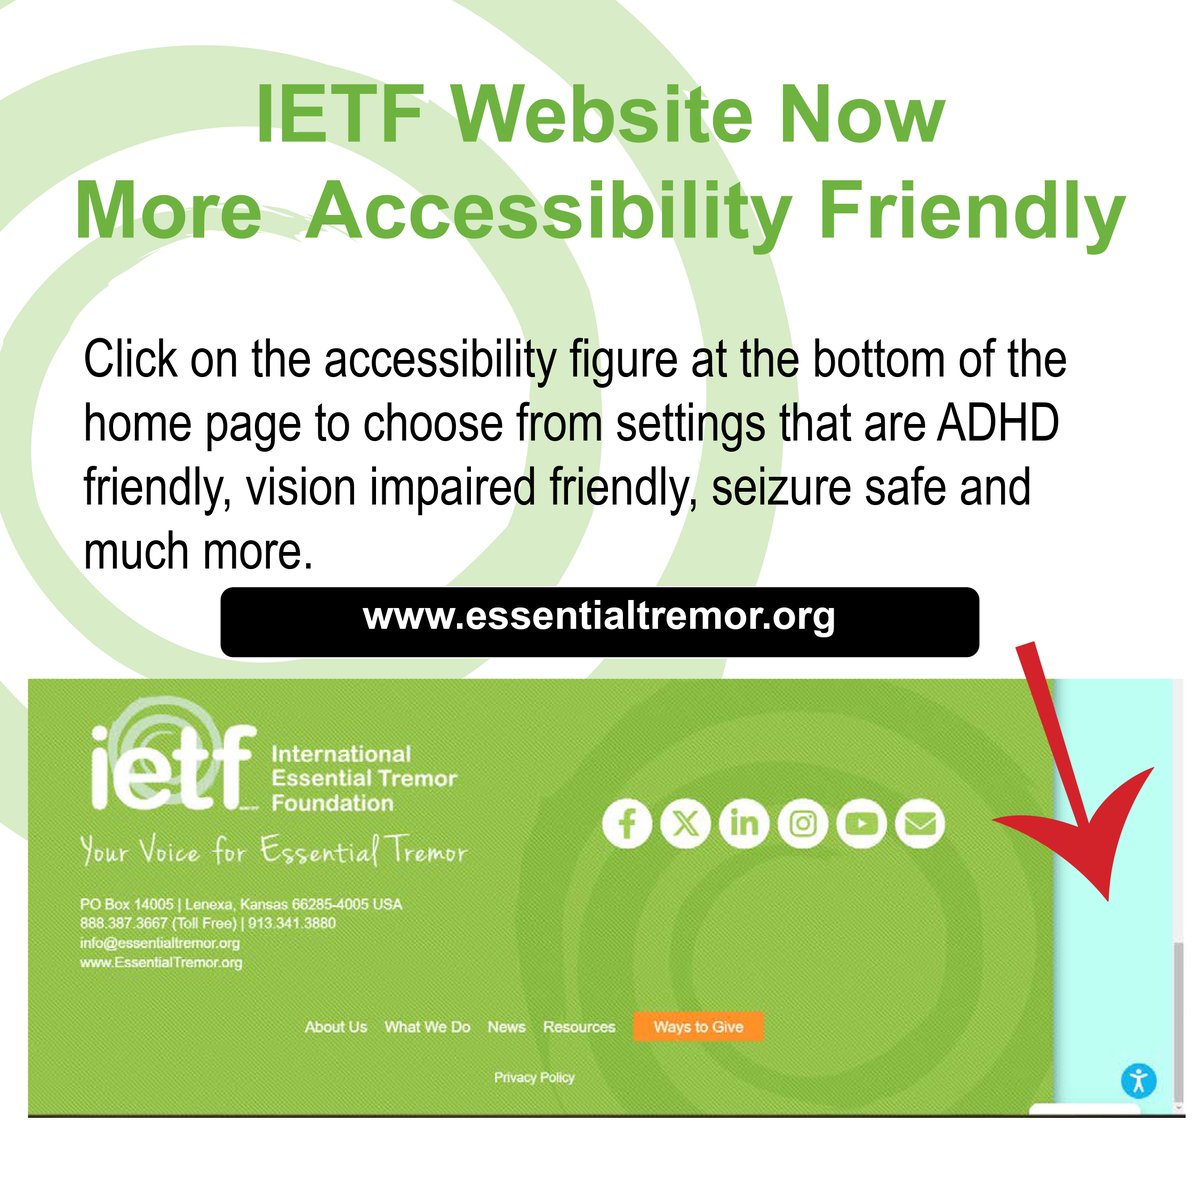 Check out some of the new accessibility features on the IETF website. They include adjustments for the vision impaired, those with ADHD, color and font size modification and more. Click on the accessibility icon on the bottom right of the homepage. essentialtremor.org.